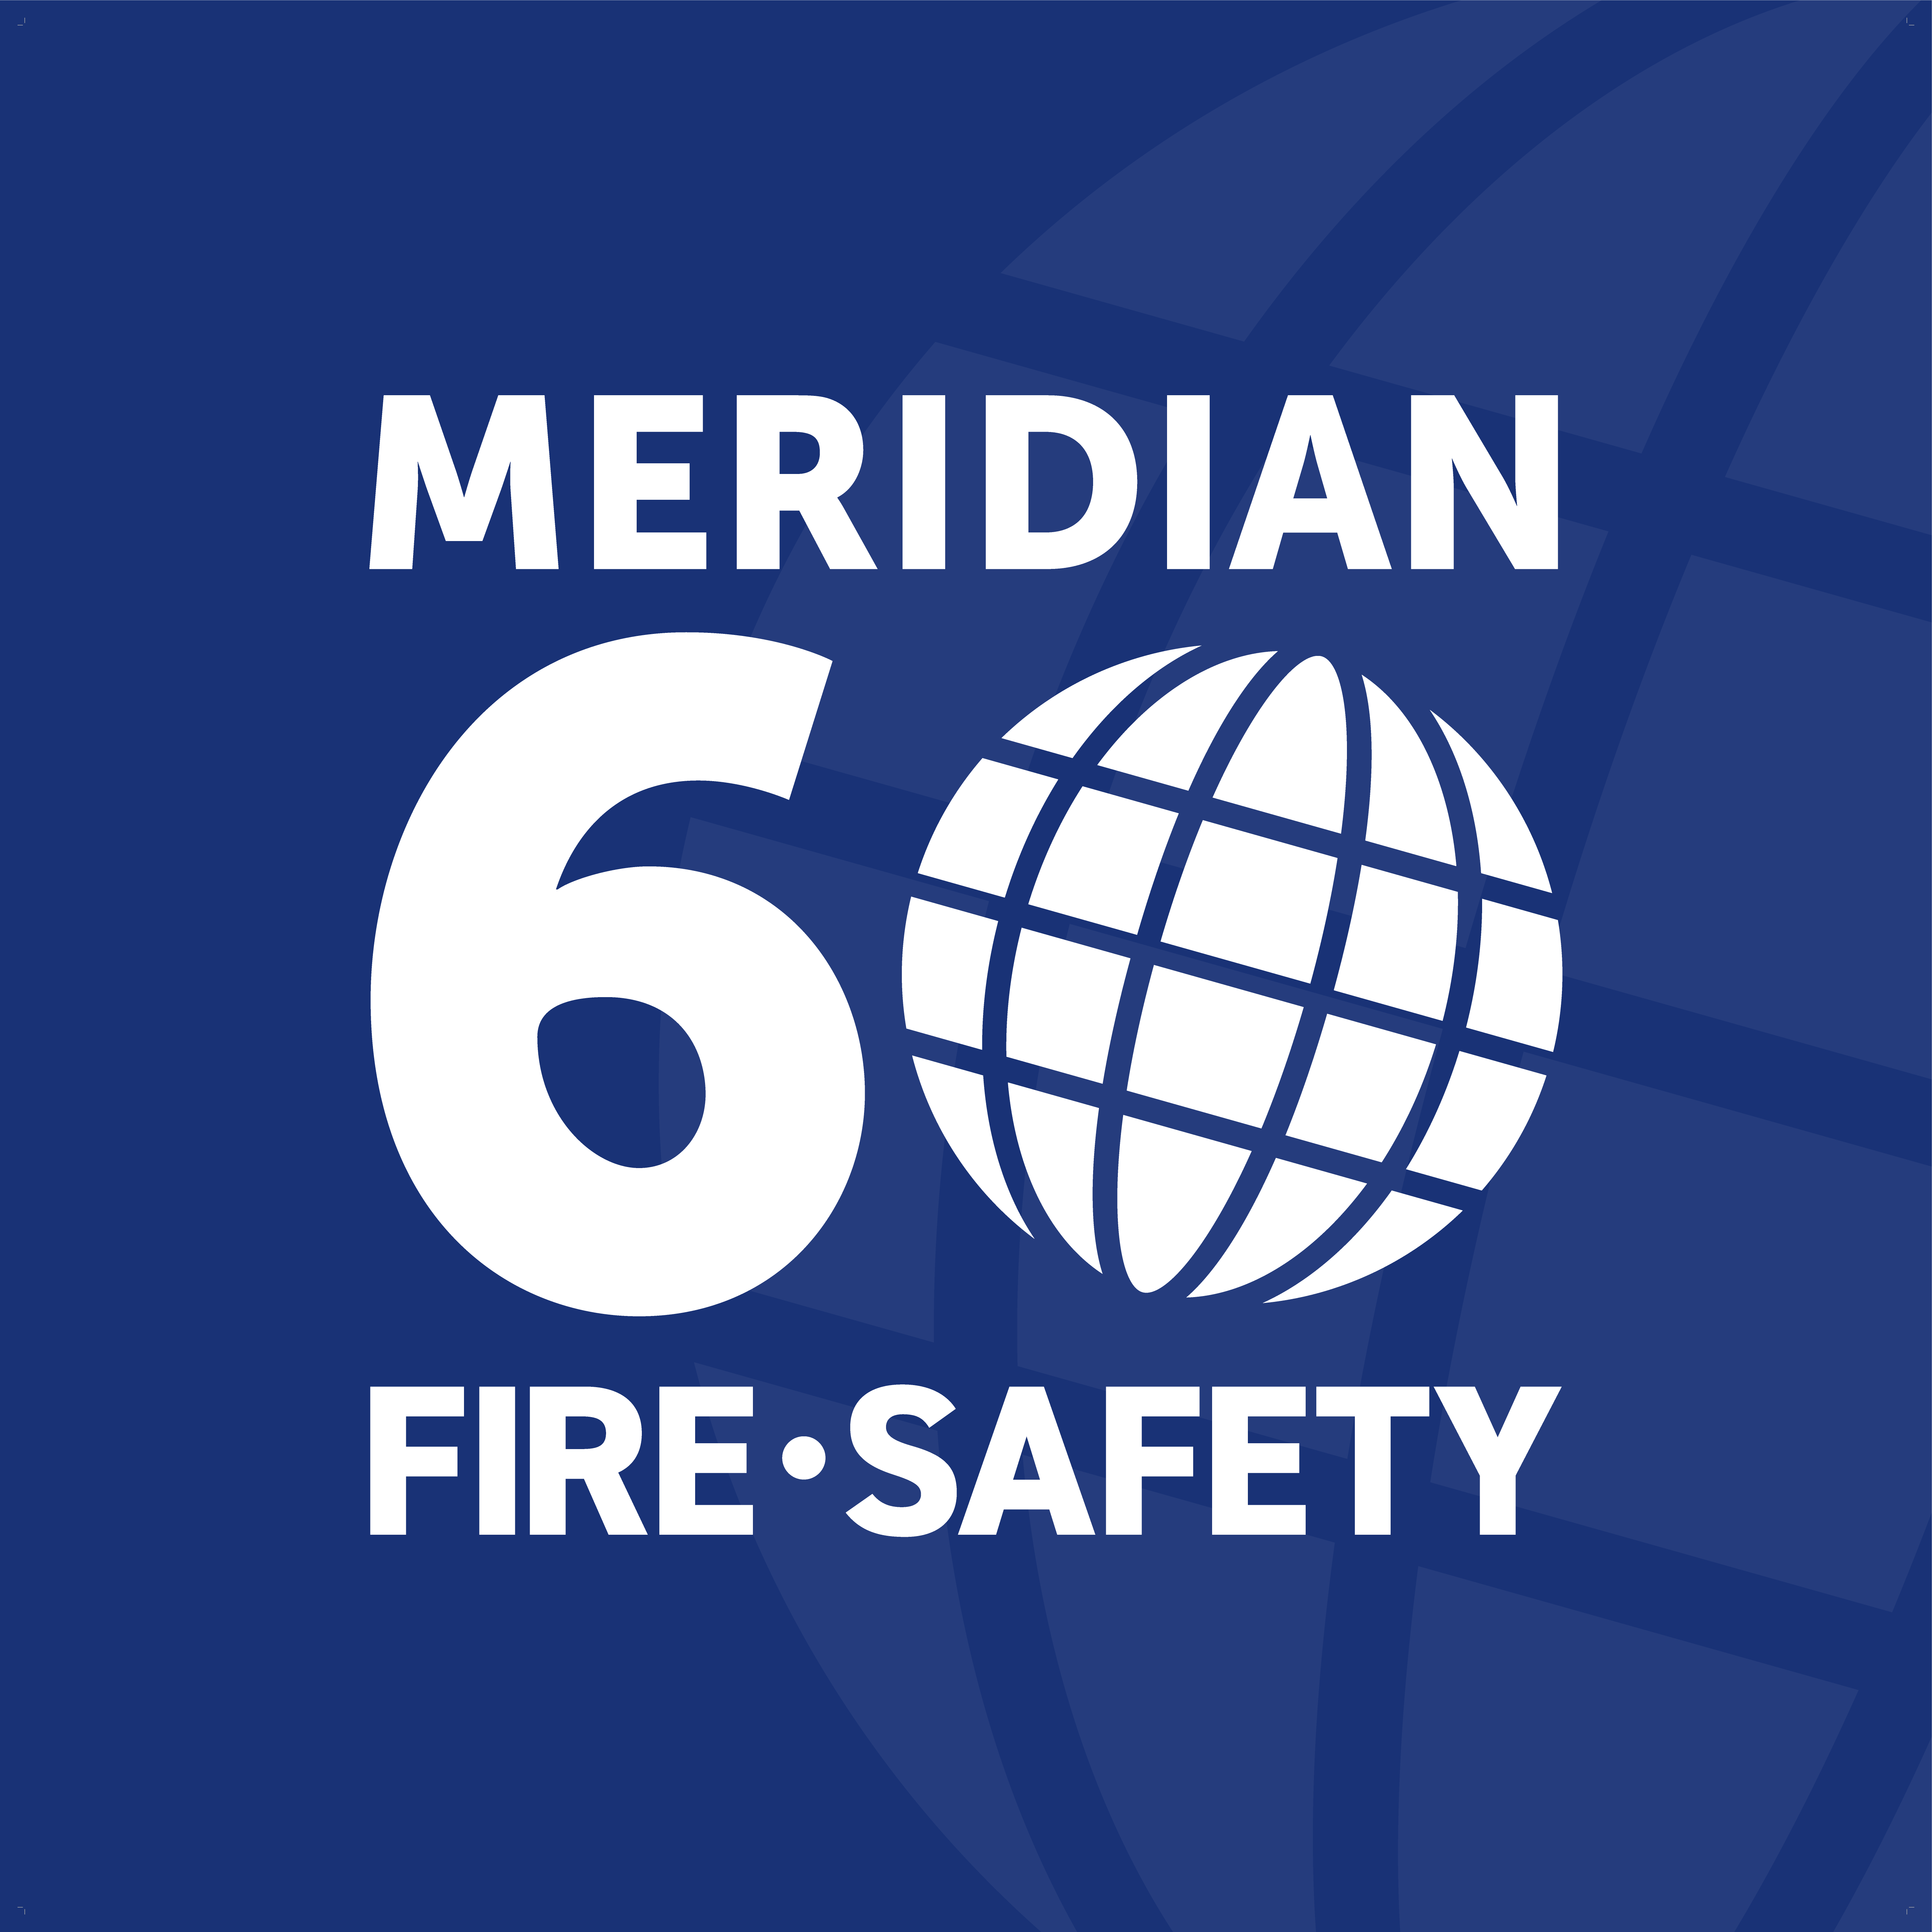 Meridian 60 Fire & Safety